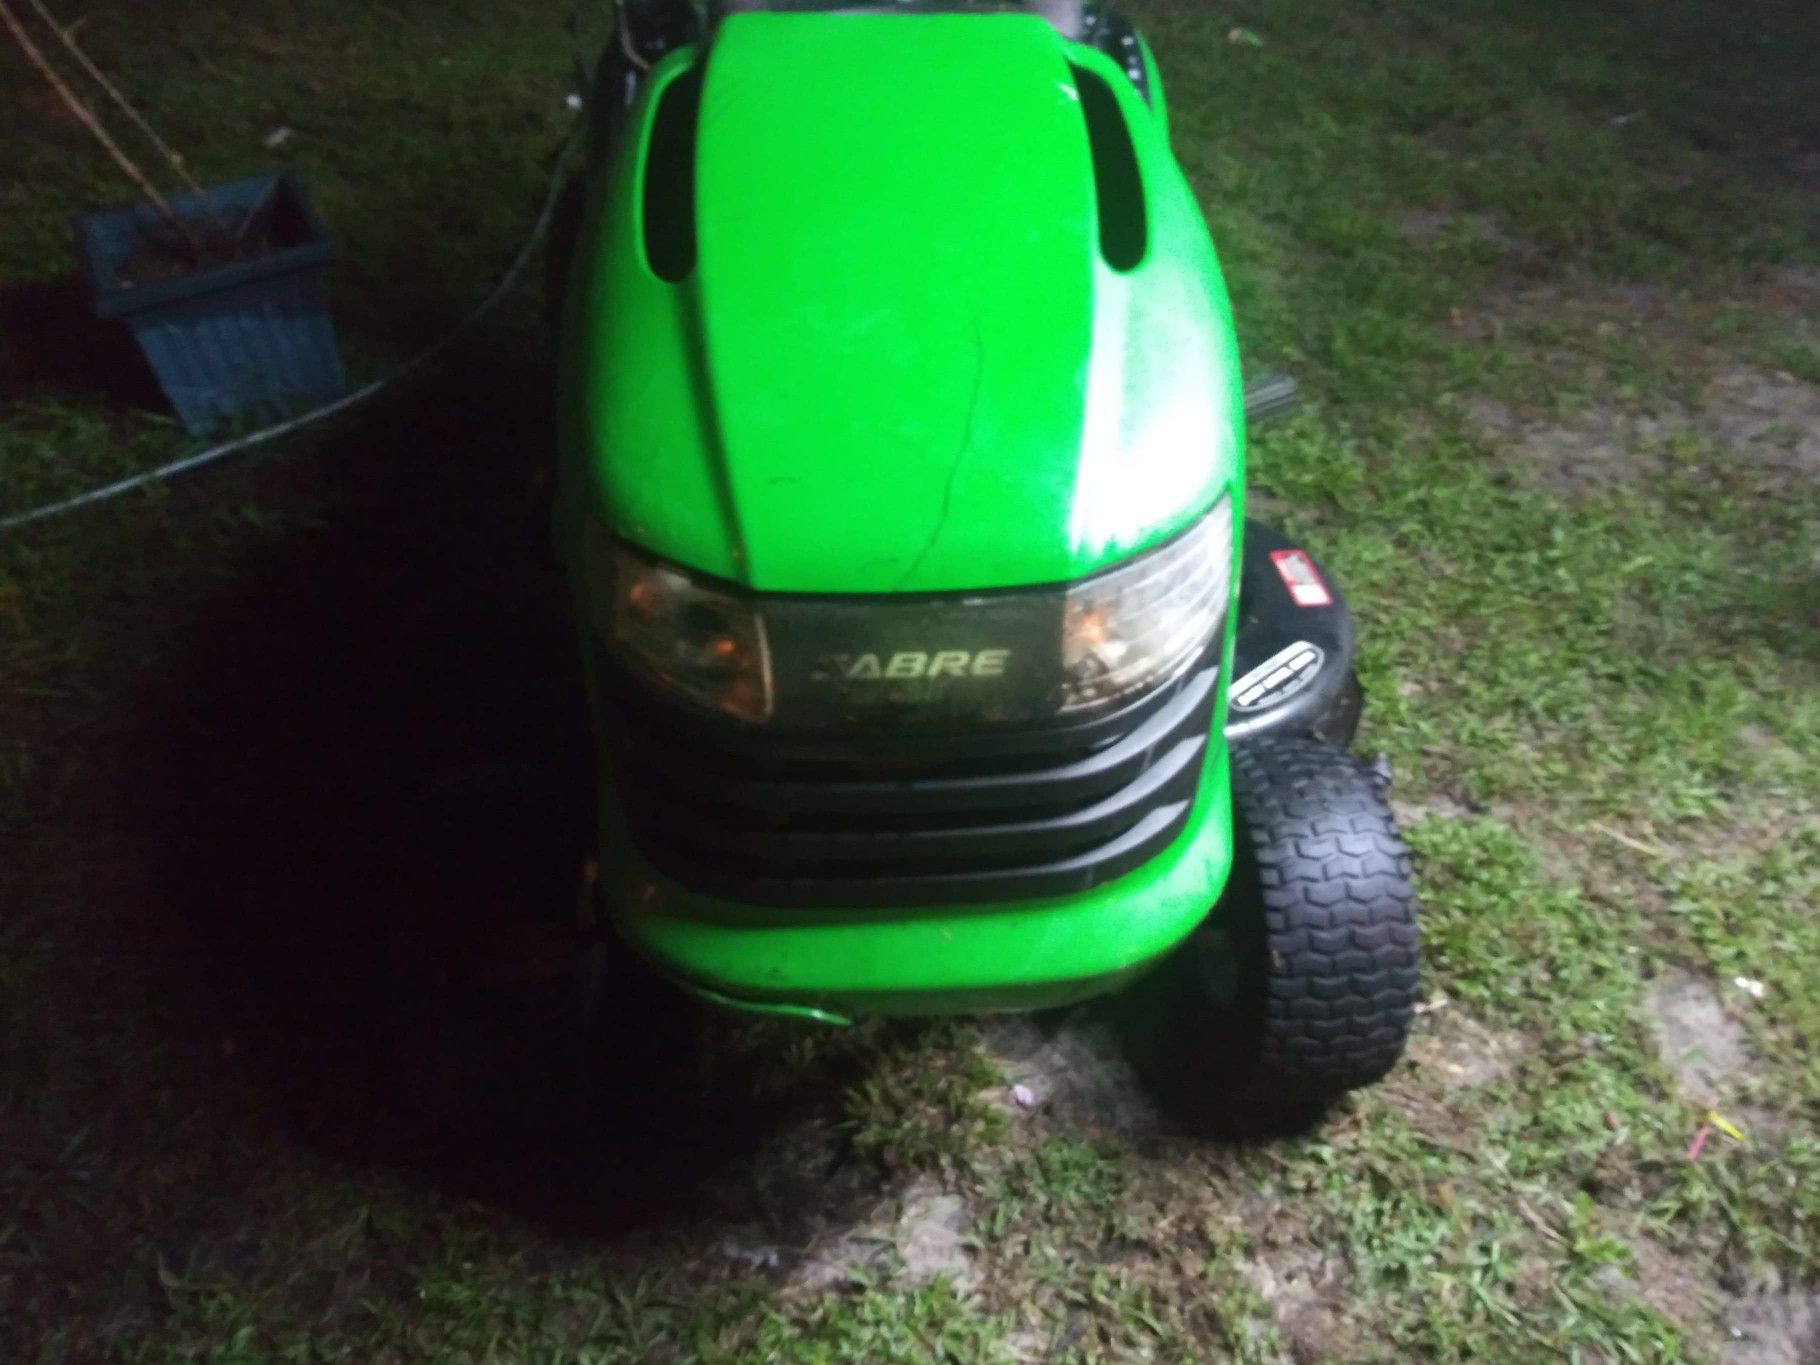 John Deere 42 inch cut self leveling 19 horsepower Briggs and Stratton runs drive and cut great